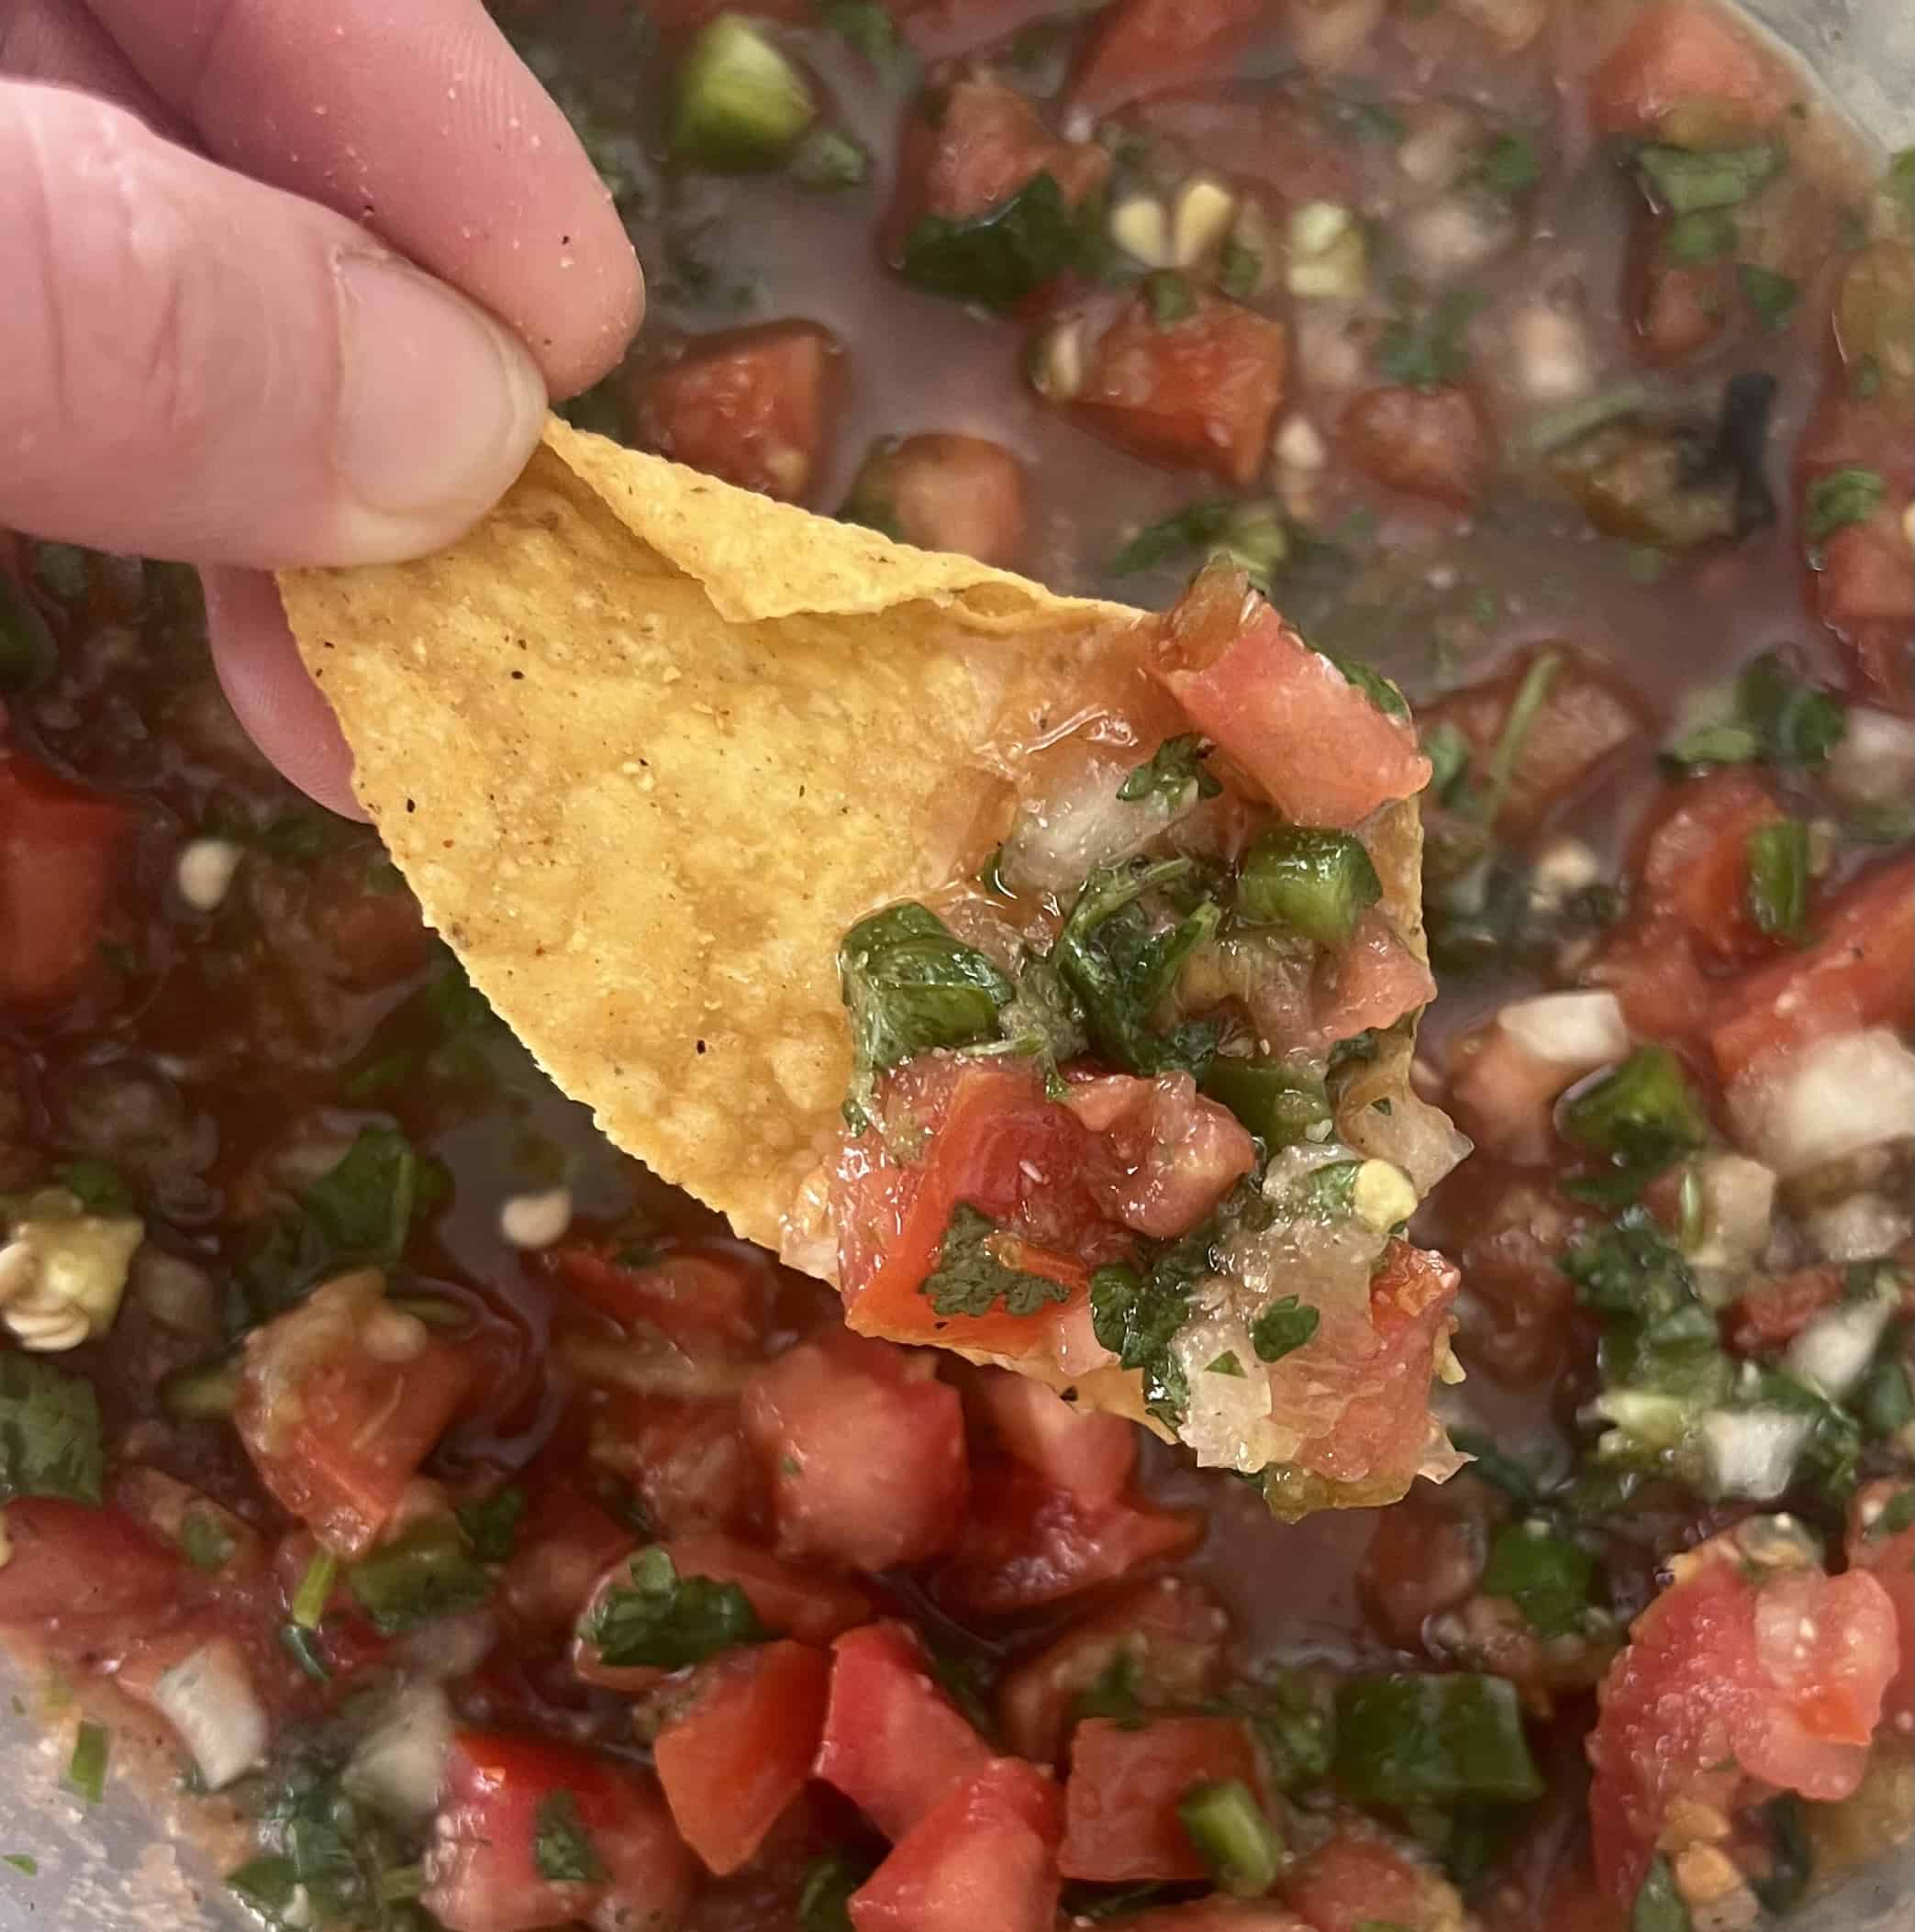 A close-up of a person dipping a tortilla chip into a bowl of red salsa. The salsa jalapeno recipe has flecks of green, possibly cilantro and jalapeno.